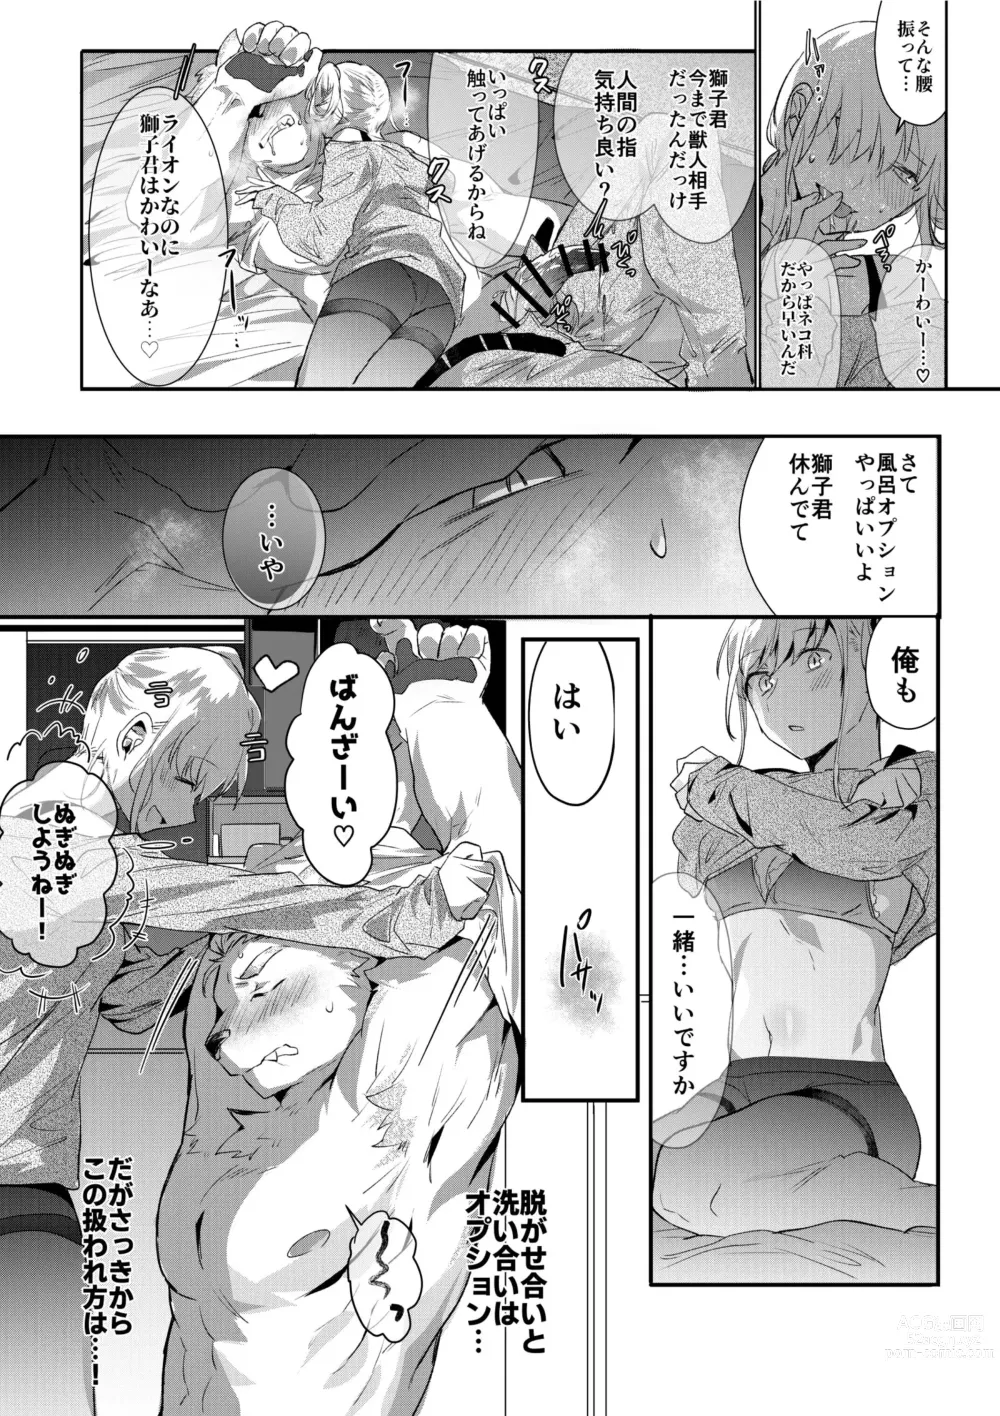 Page 6 of doujinshi Rental Lion to LoveHo